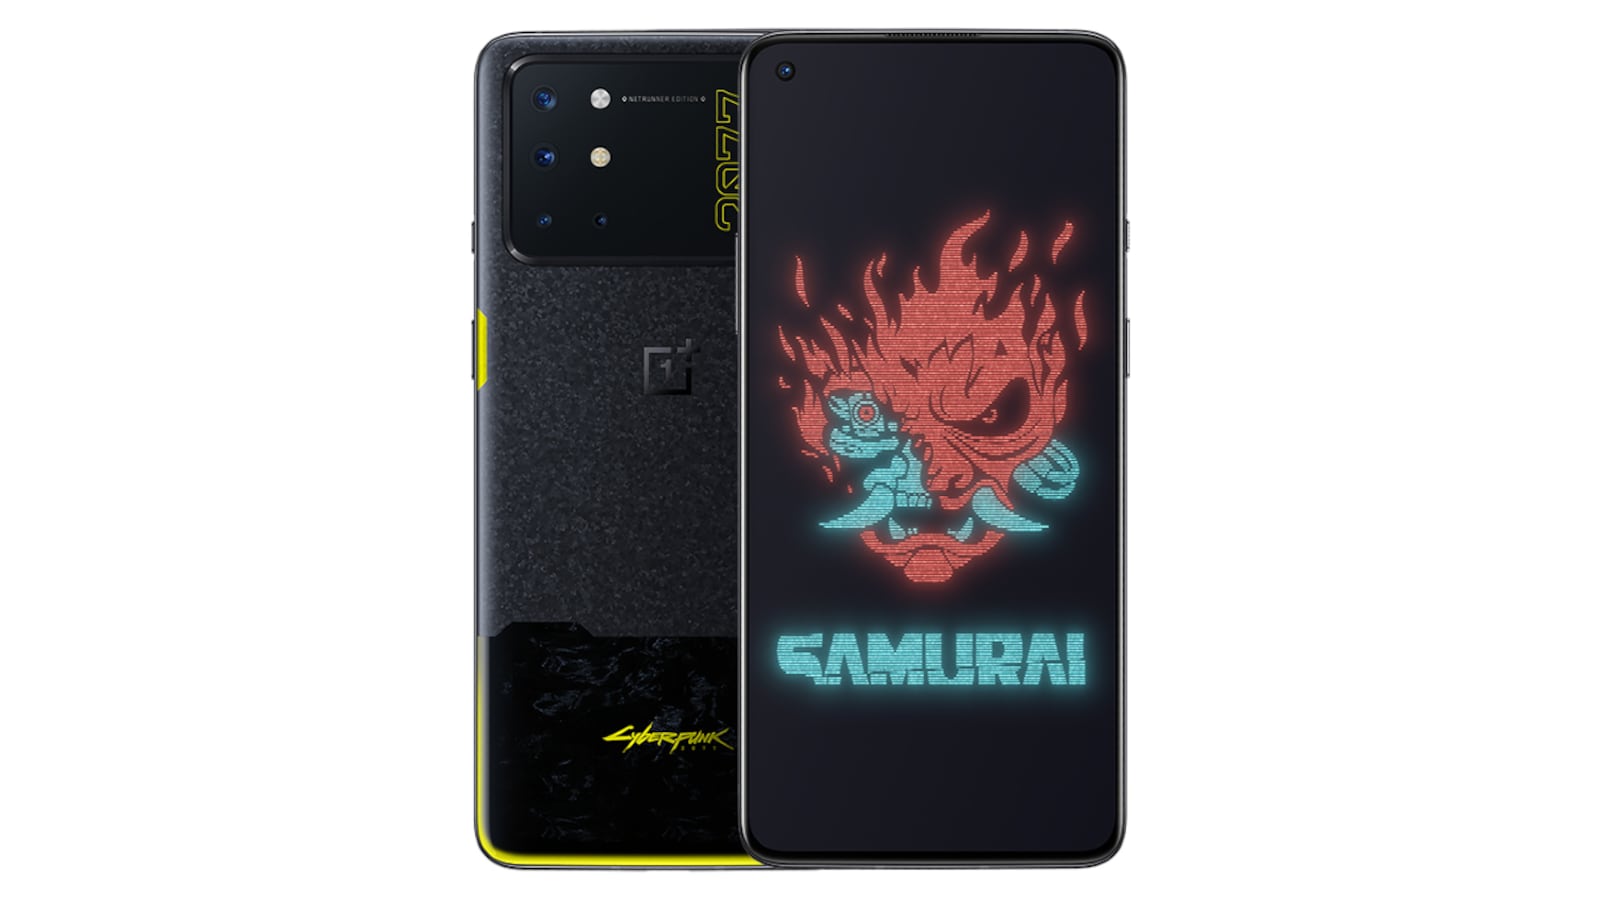 How To Apply OnePlus 8T Cyberpunk 2077 Live Wallpapers On Any Device?